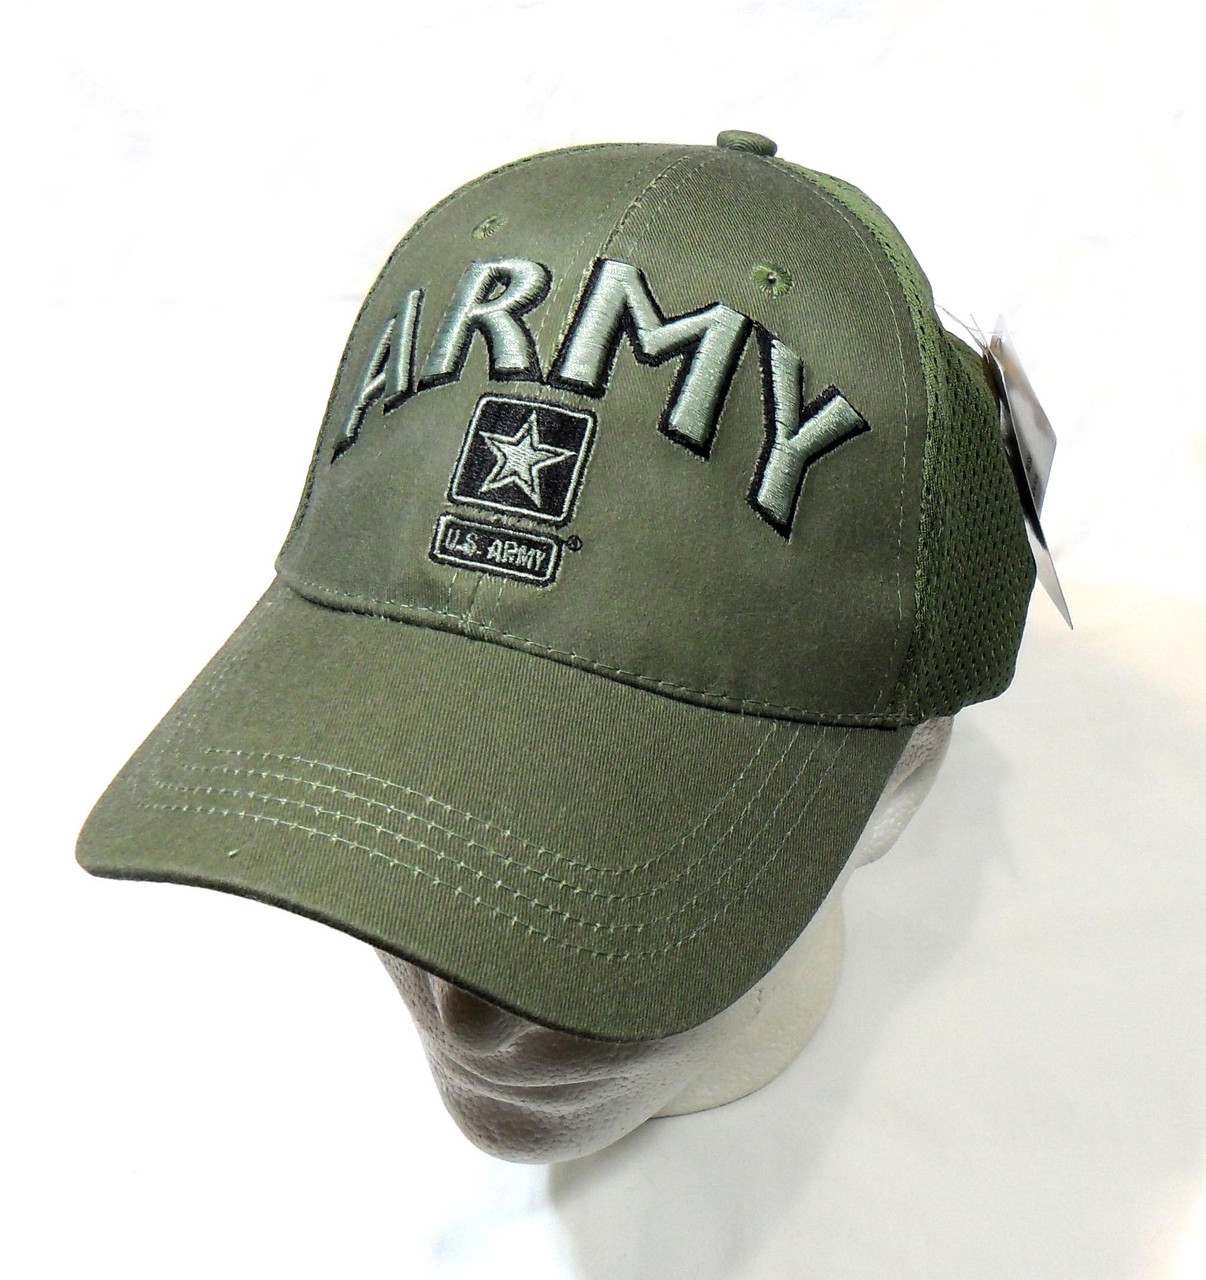 U.S. Army with Army Star OD Green Officially Licensed Baseball Cap Hat